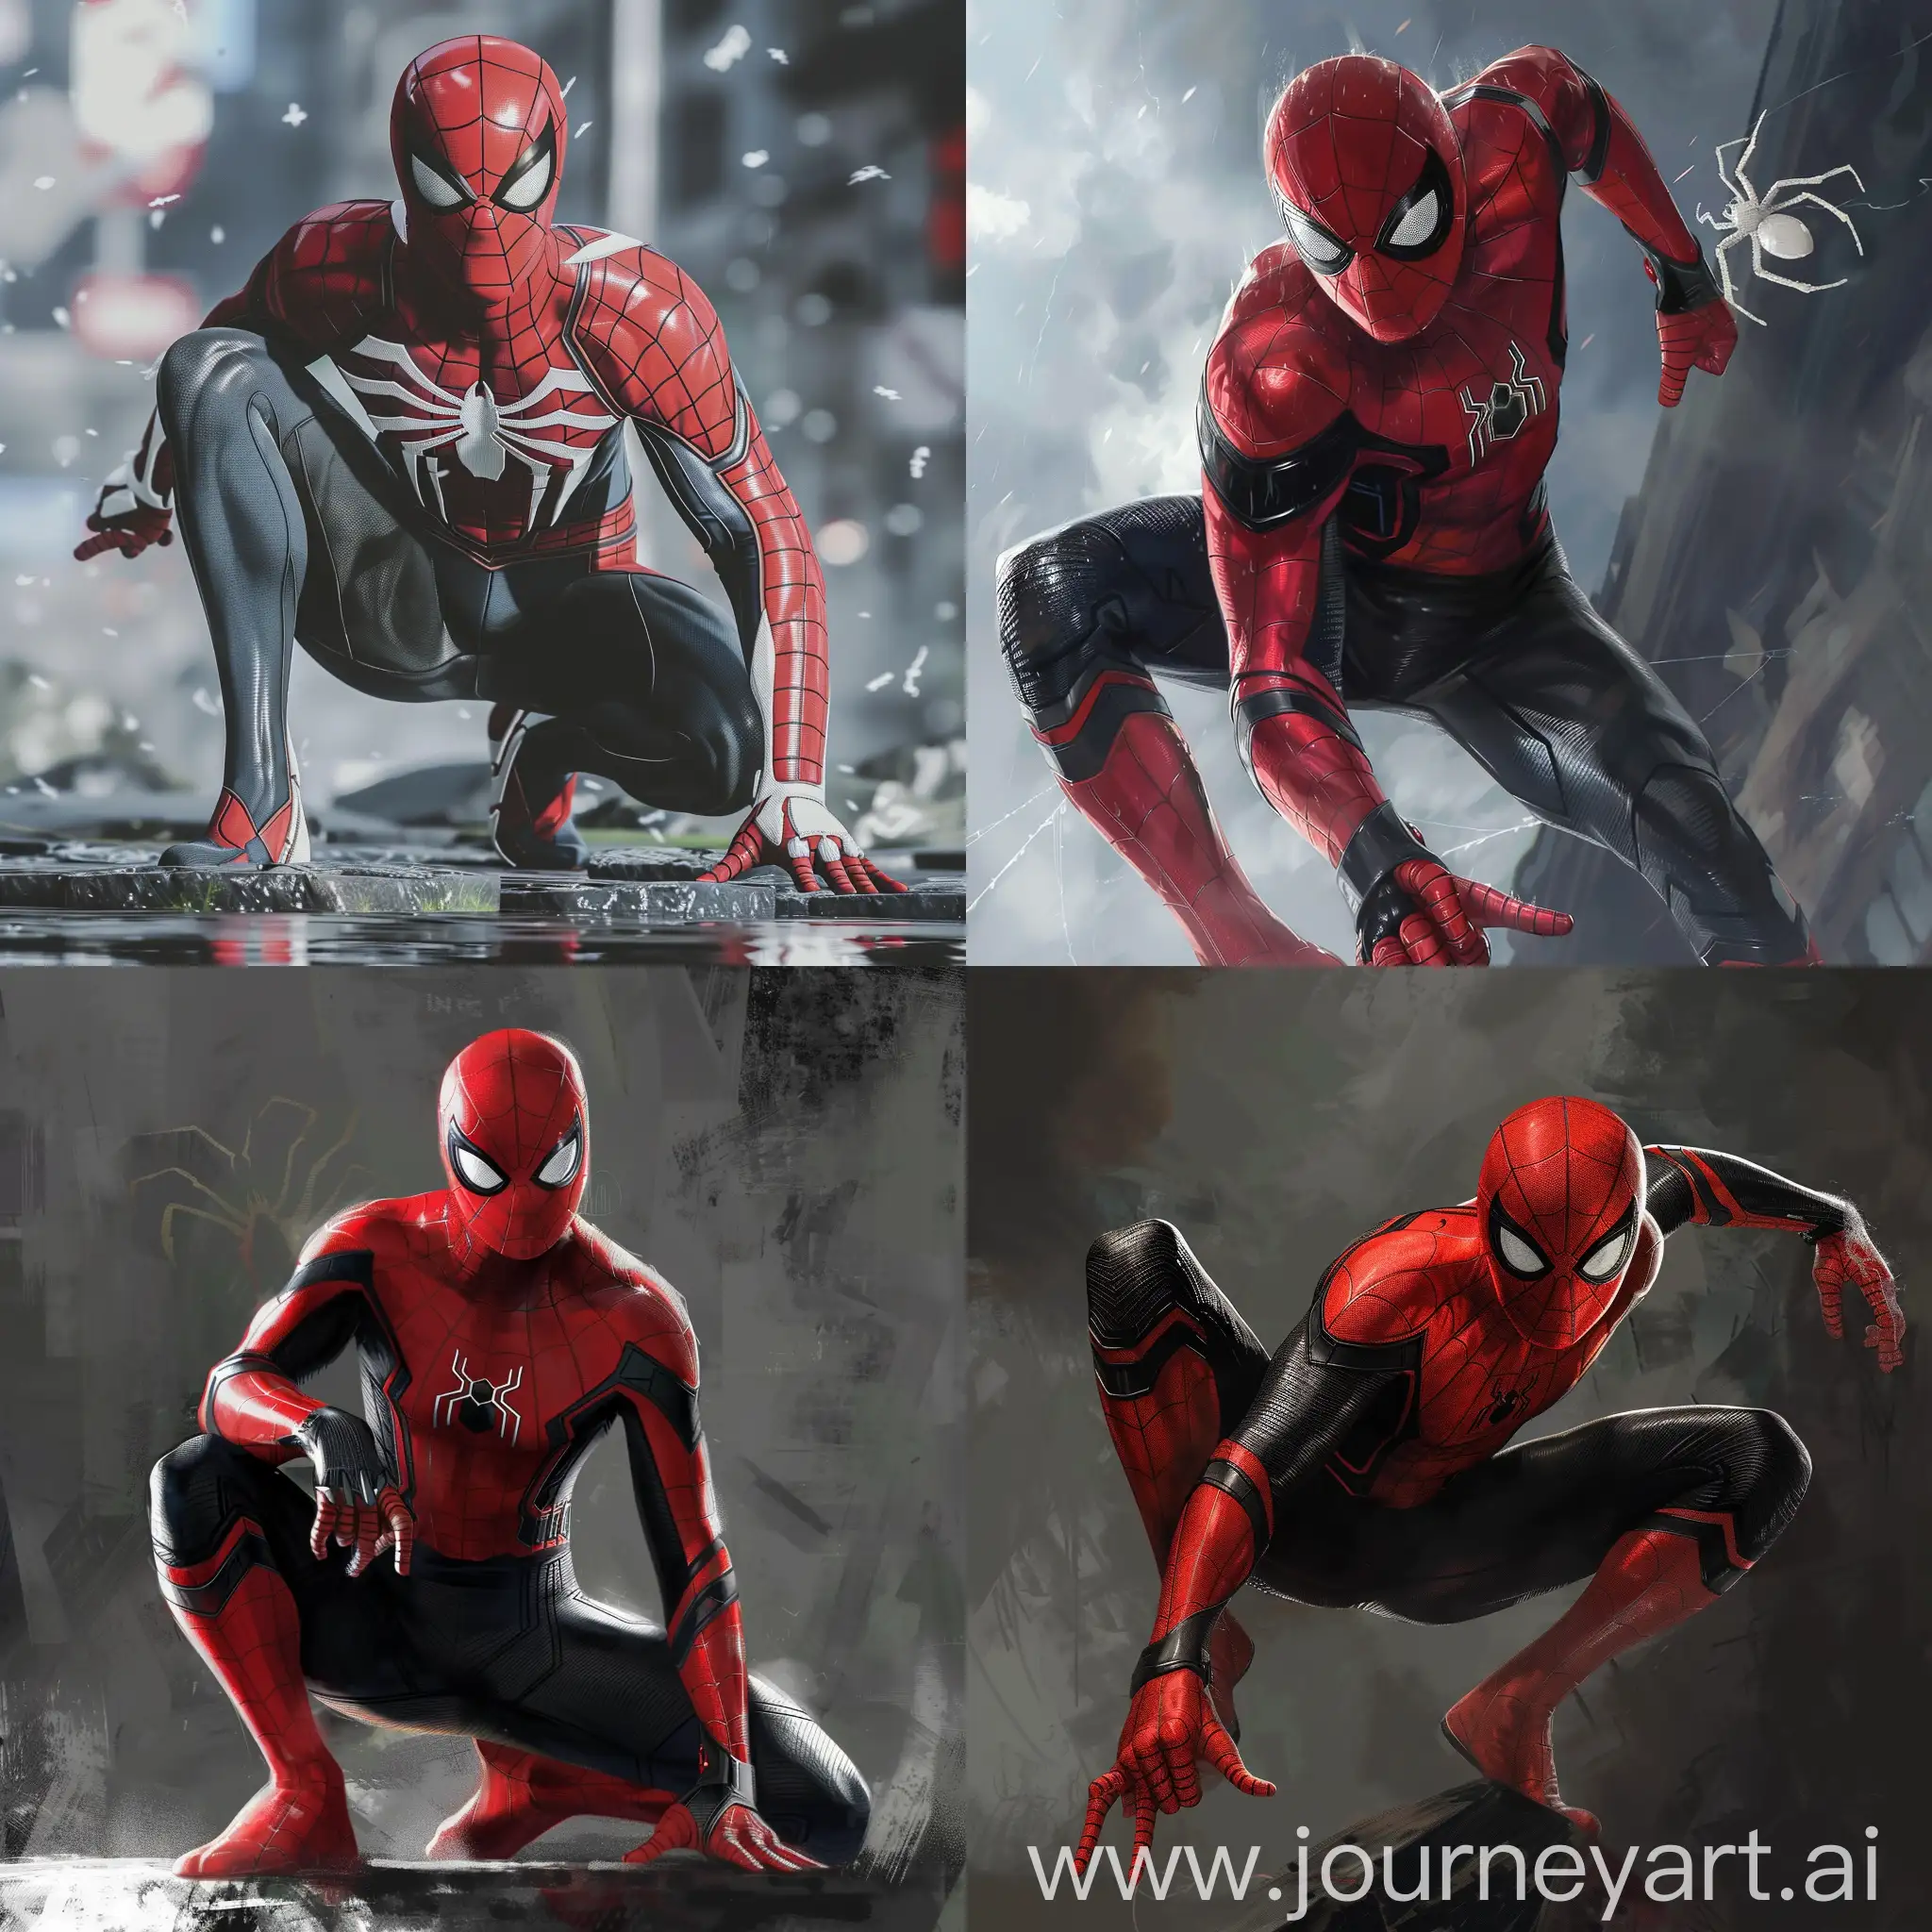 Spiderman-Red-and-Black-Suit-with-White-Spider